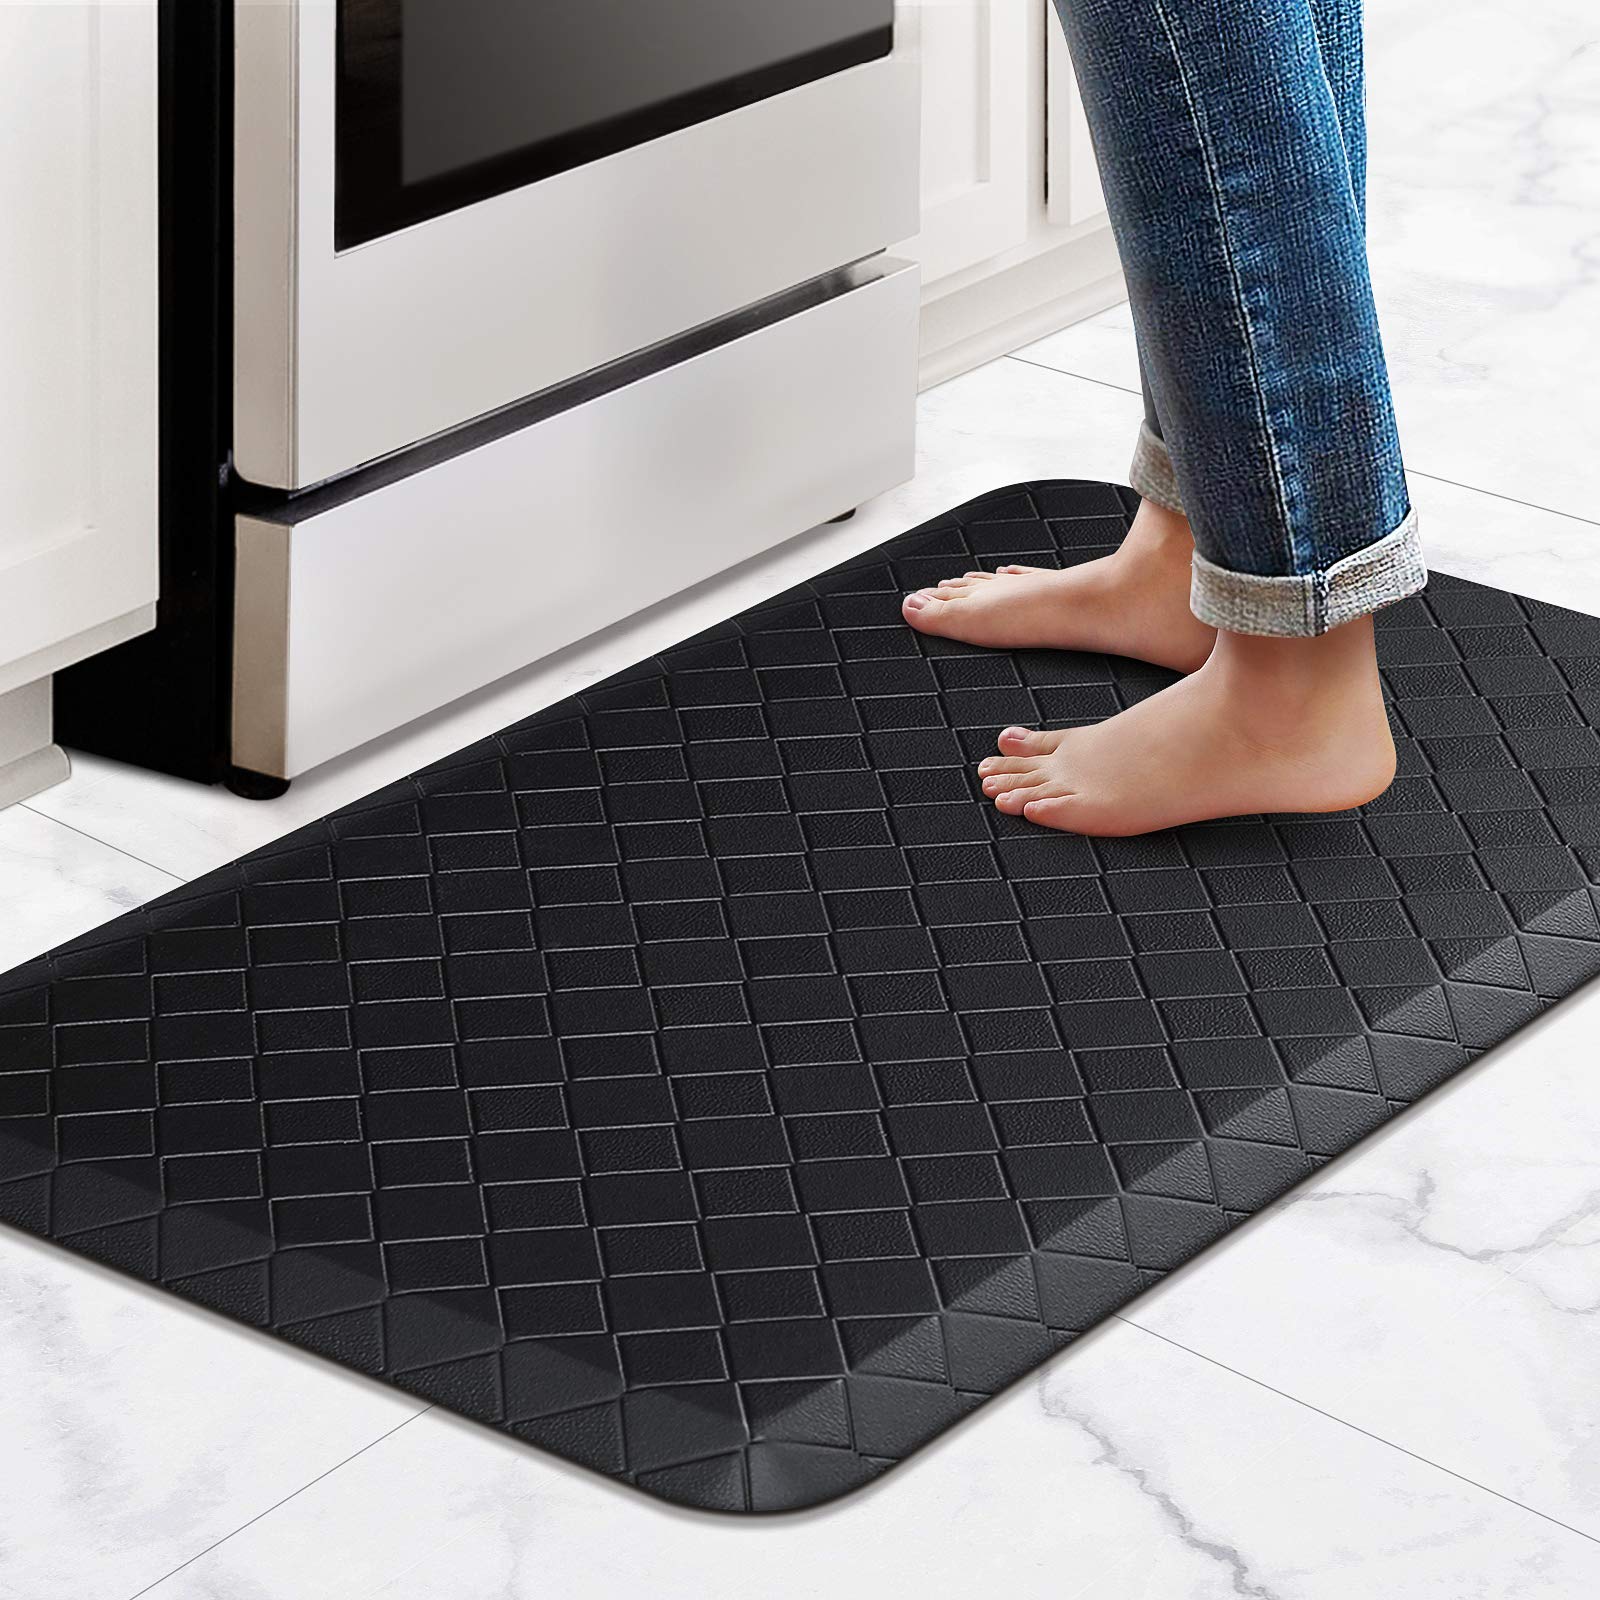 17.3"x 28" HappyTrends Anti-Fatigue Floor Mat (Black) $14 + Free Shipping w/ Prime or on orders $25+